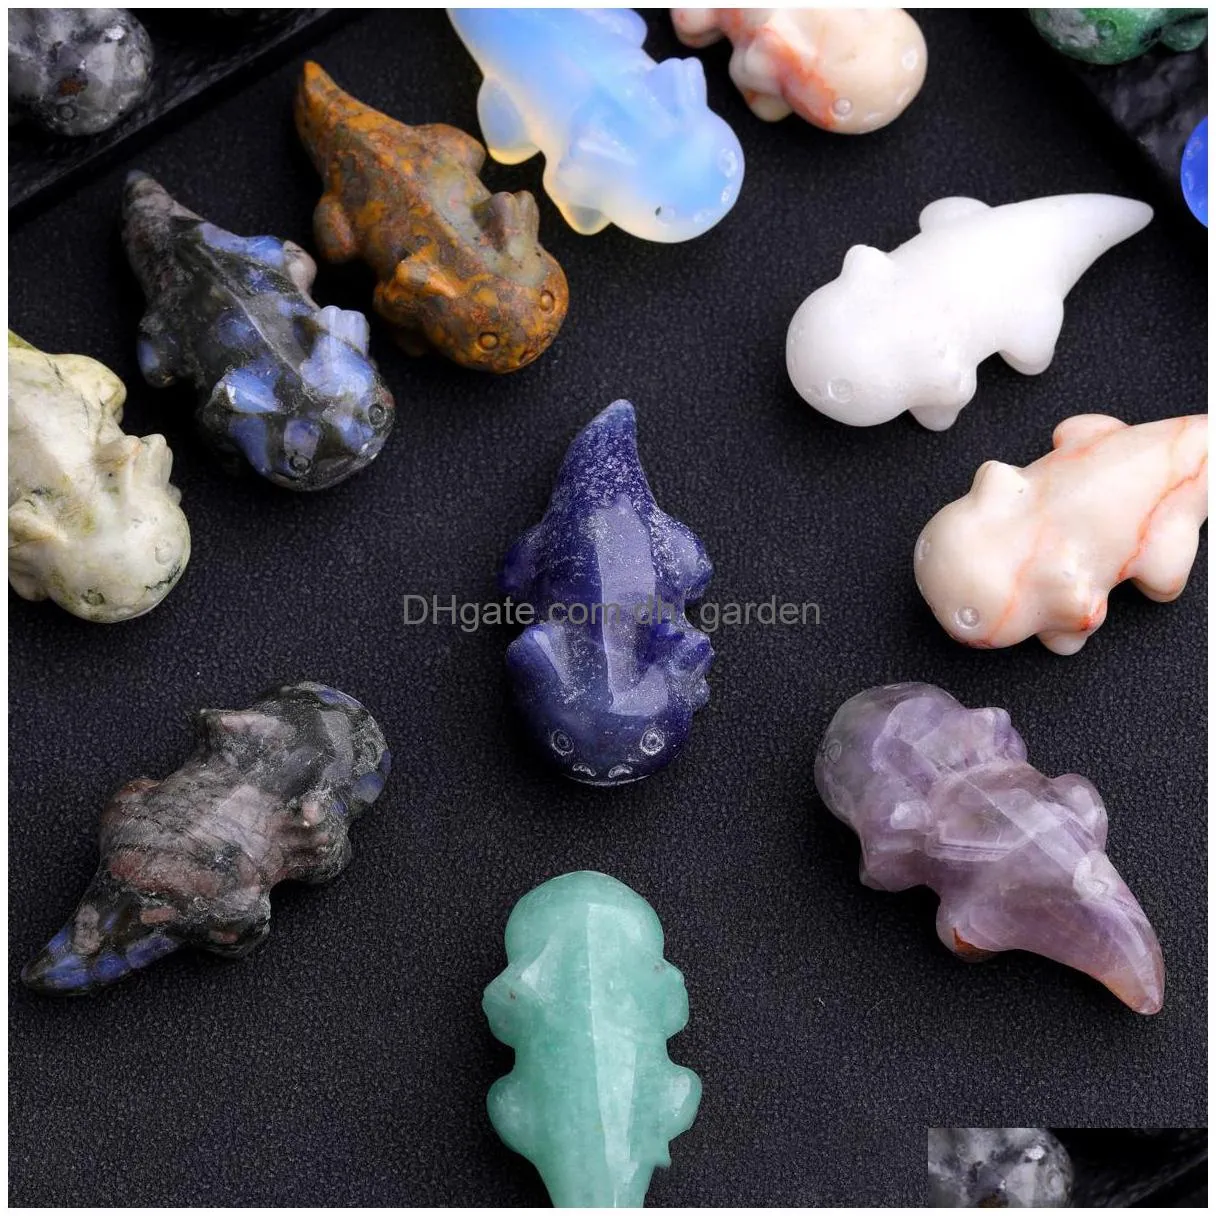 Stone Nt Salamander Fish Statue Natural Stone Quartz Crystal Healing Carved Stereoscopic Crafts Office Home Desktop Drop Del Dhgarden Dheqv